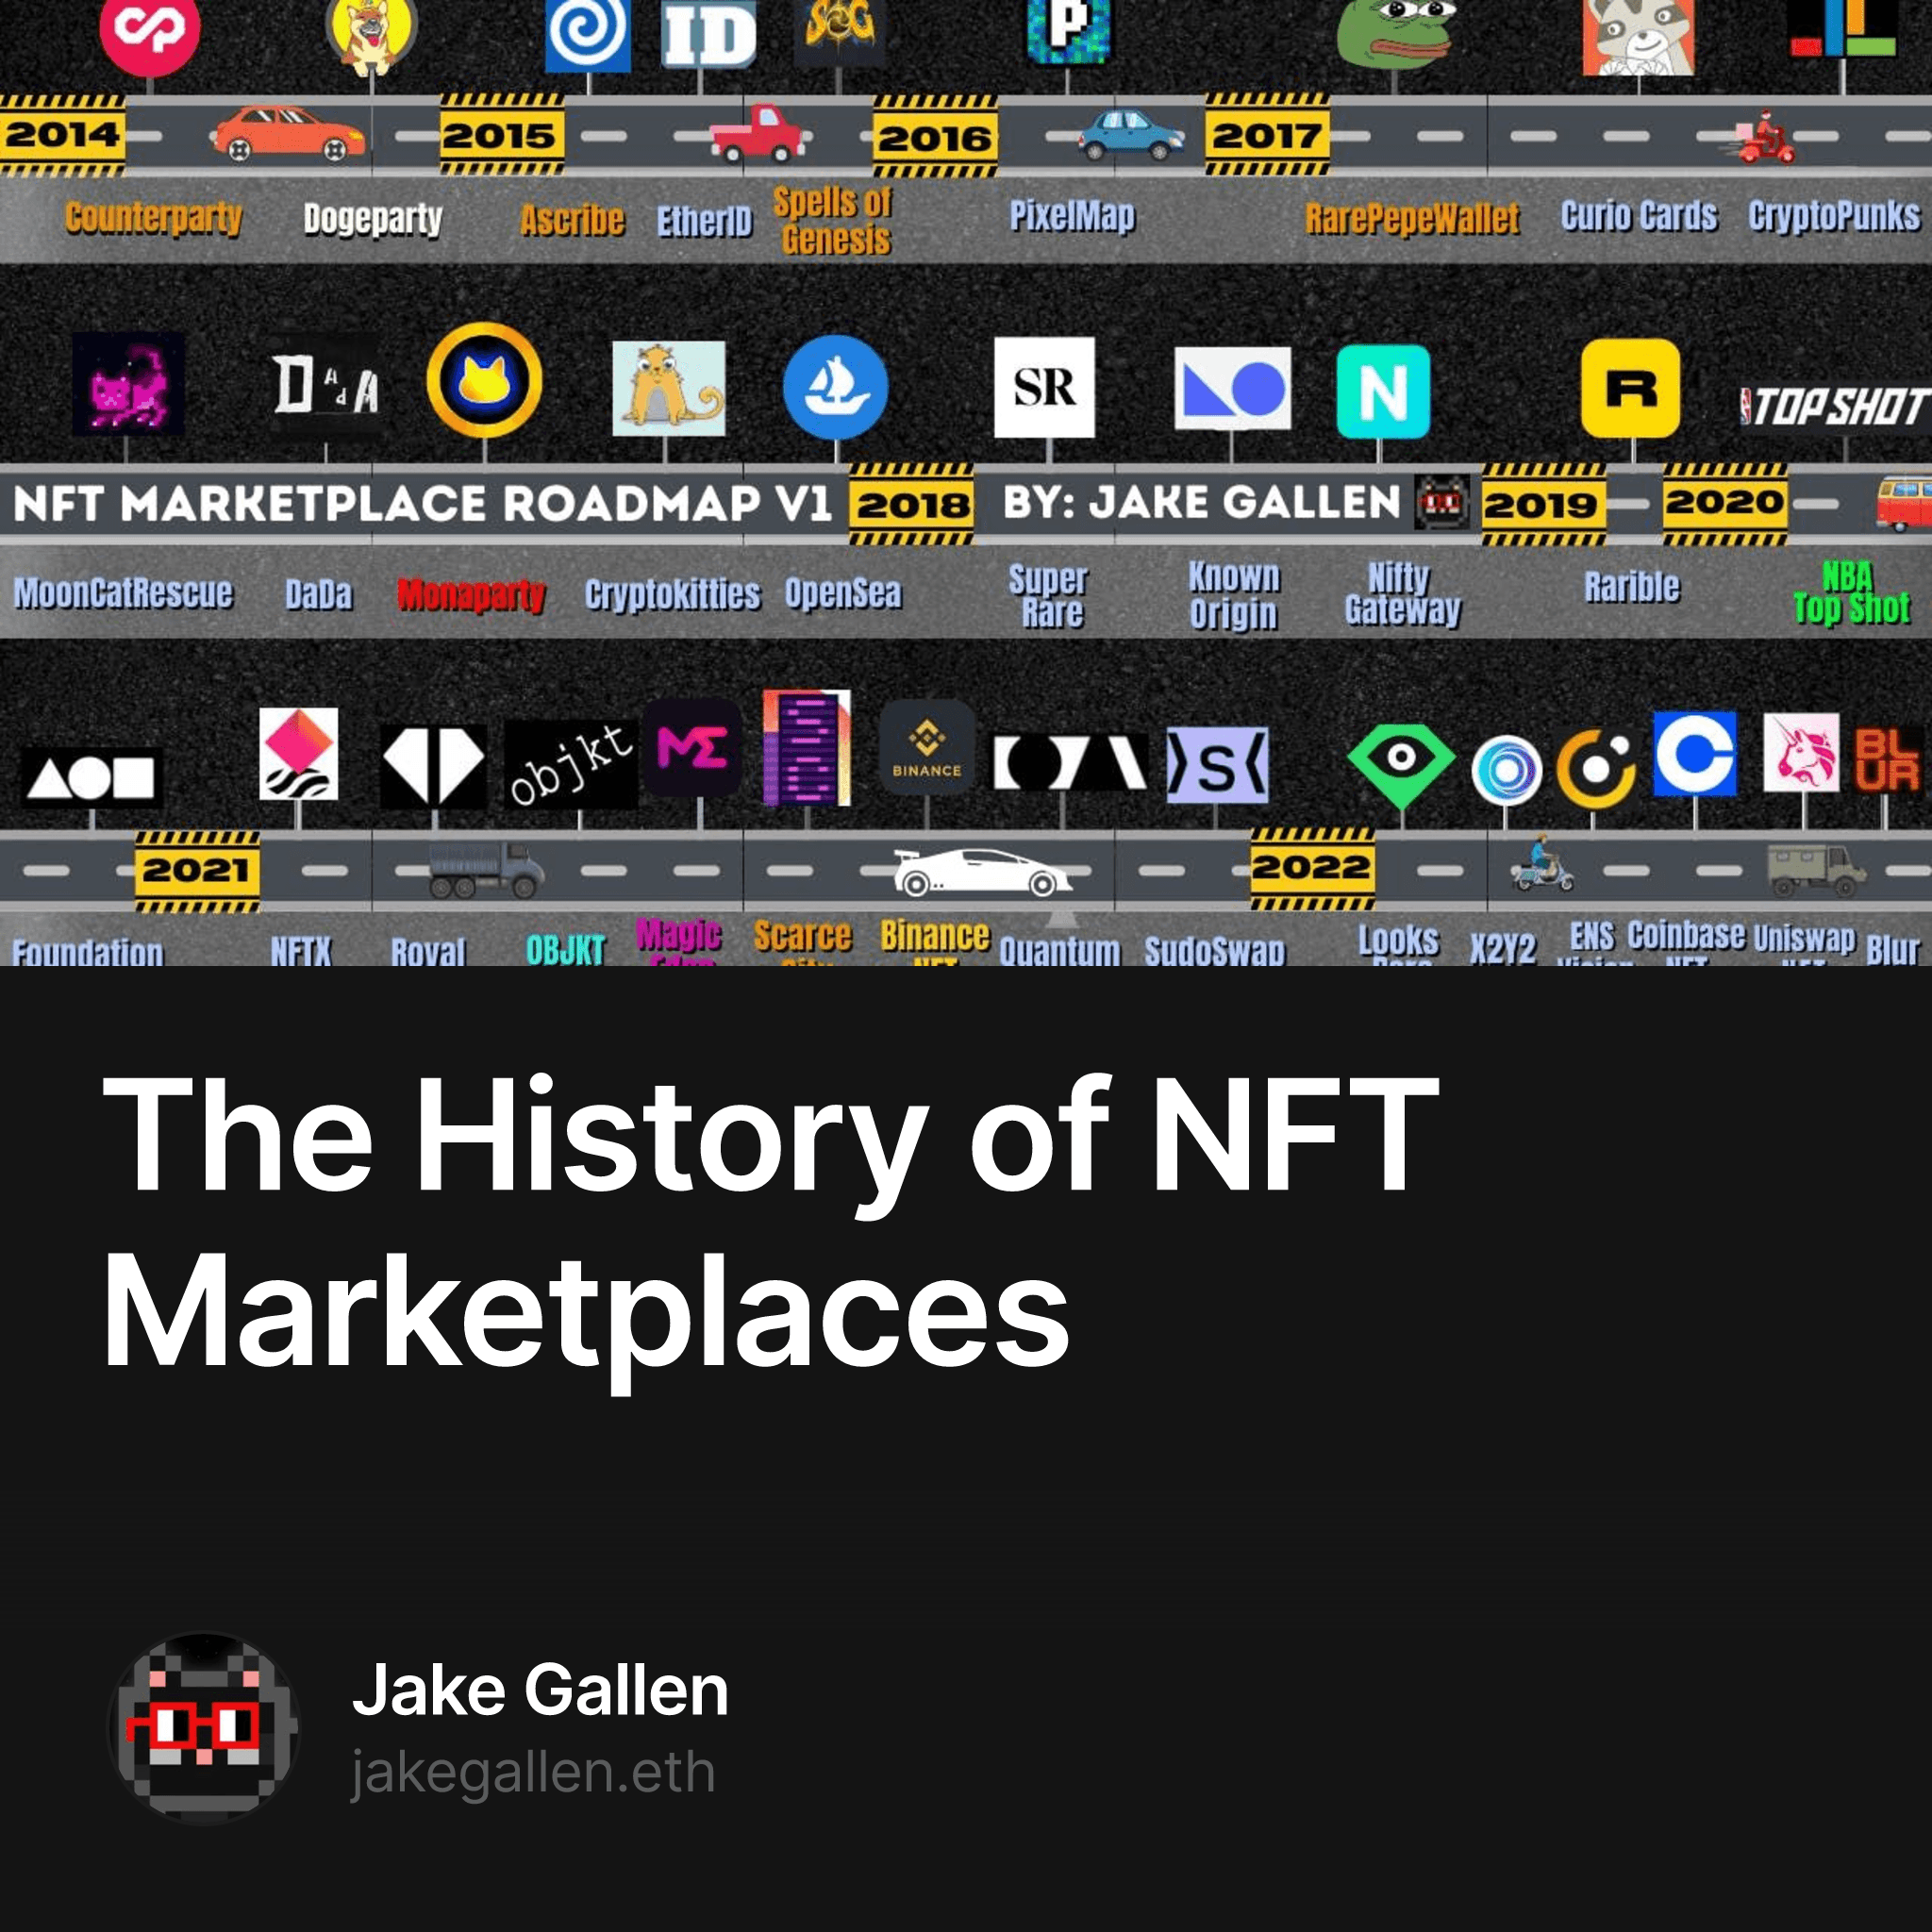 The History of NFT Marketplaces 1/200